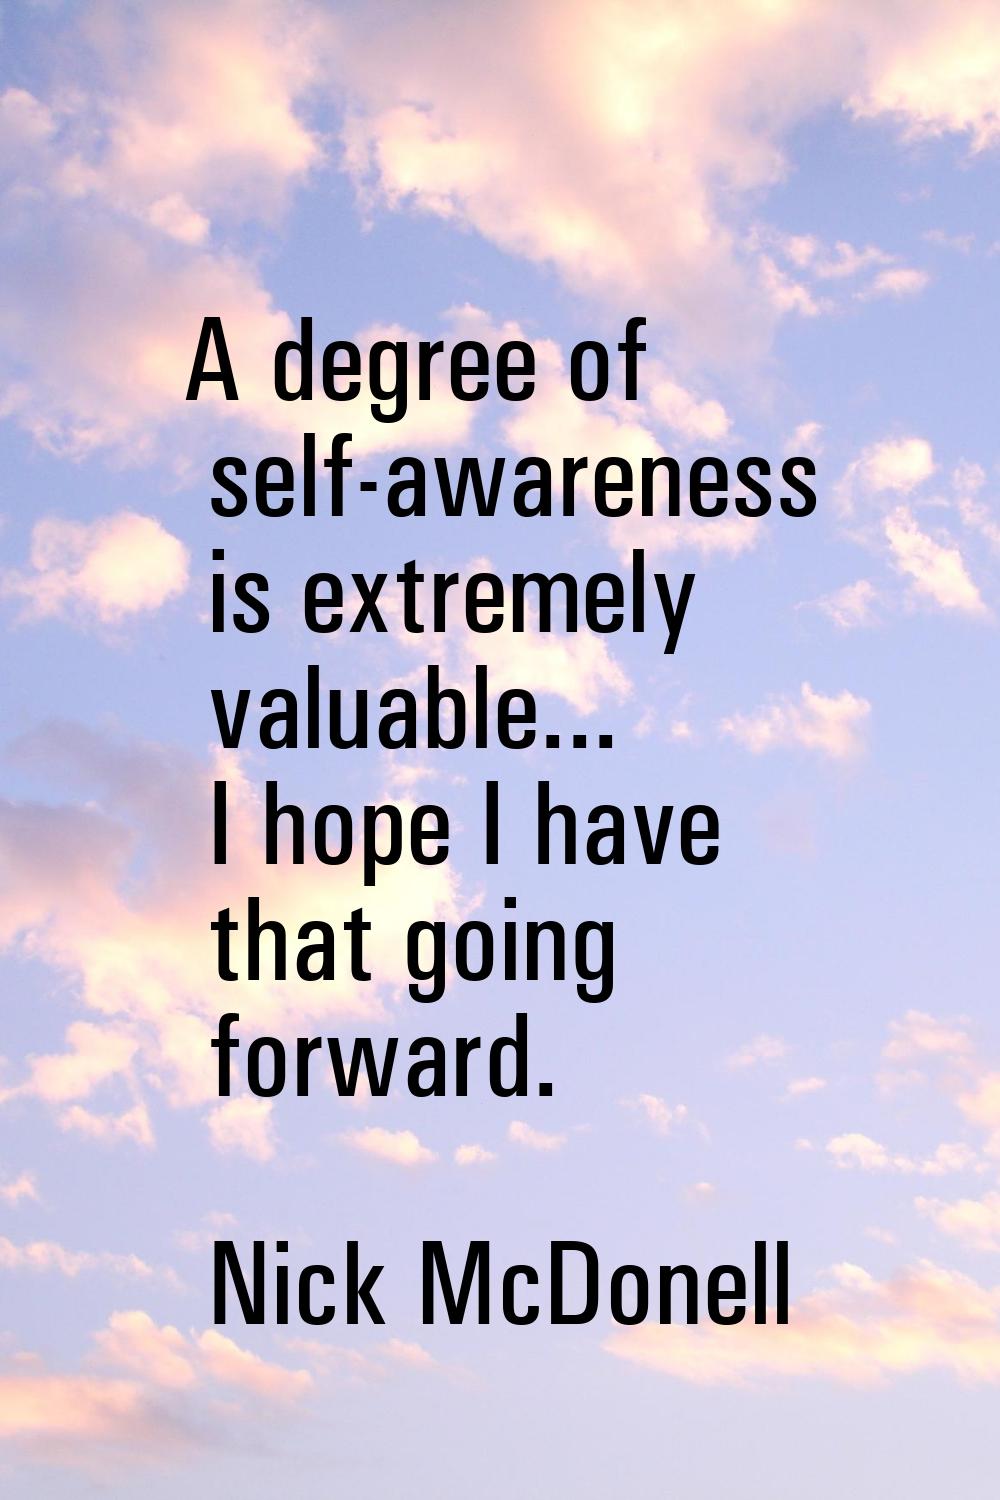 A degree of self-awareness is extremely valuable... I hope I have that going forward.